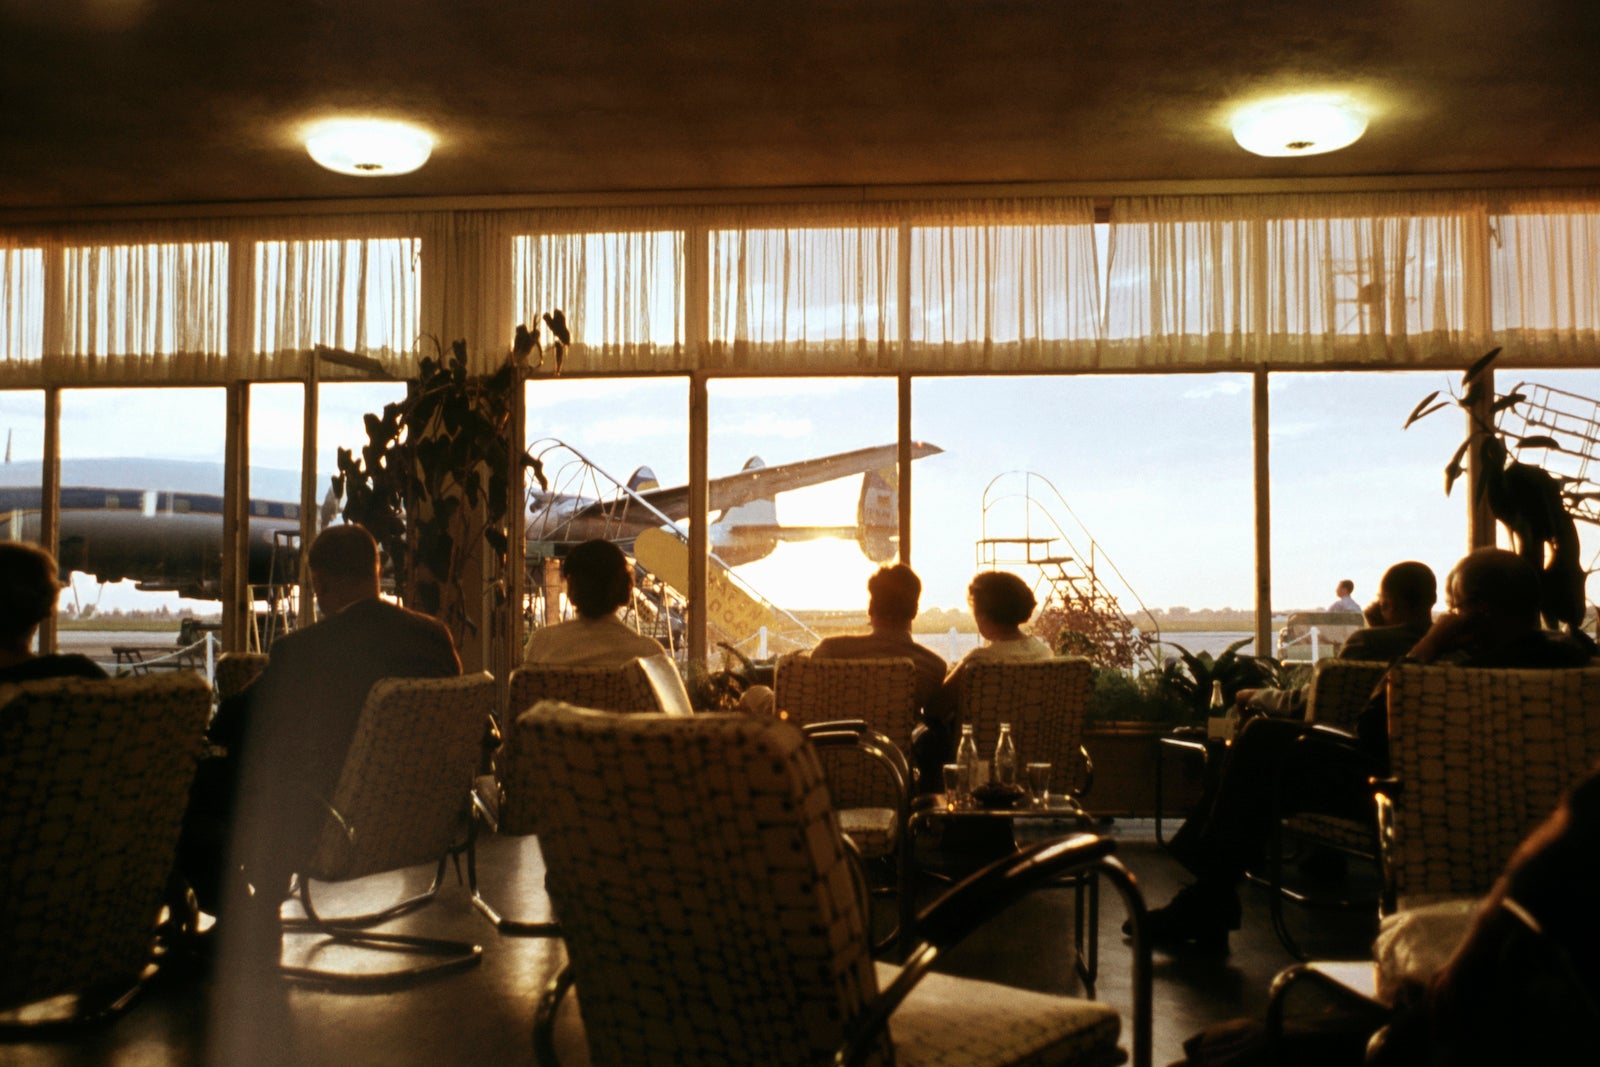 many people watch sunset from the windows of an airport lounge